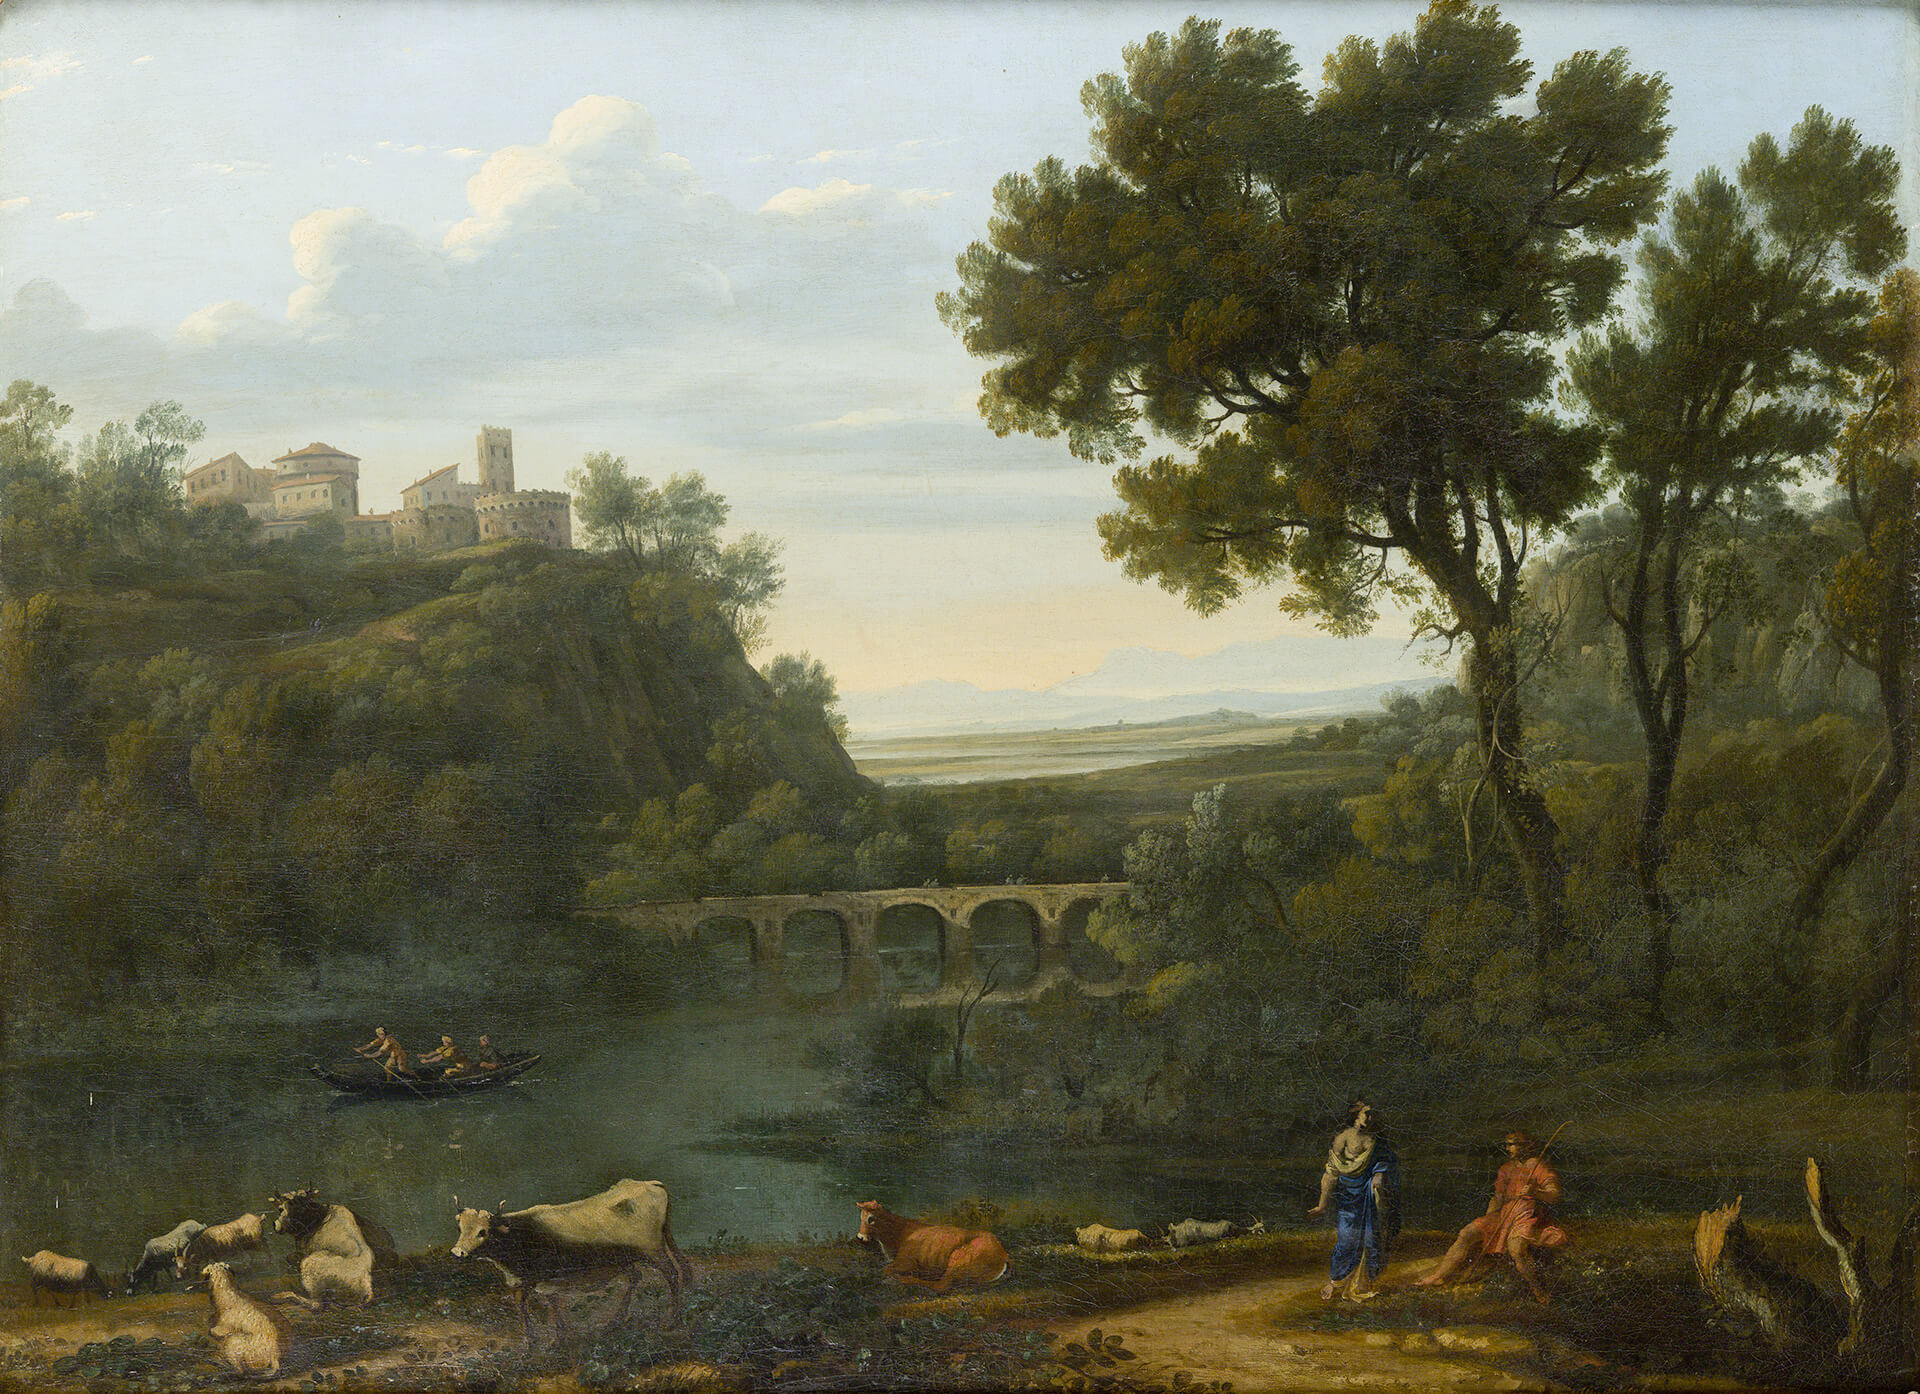 A roman landscape with a small town, an aqueduct, and a shepard on the bank of a river